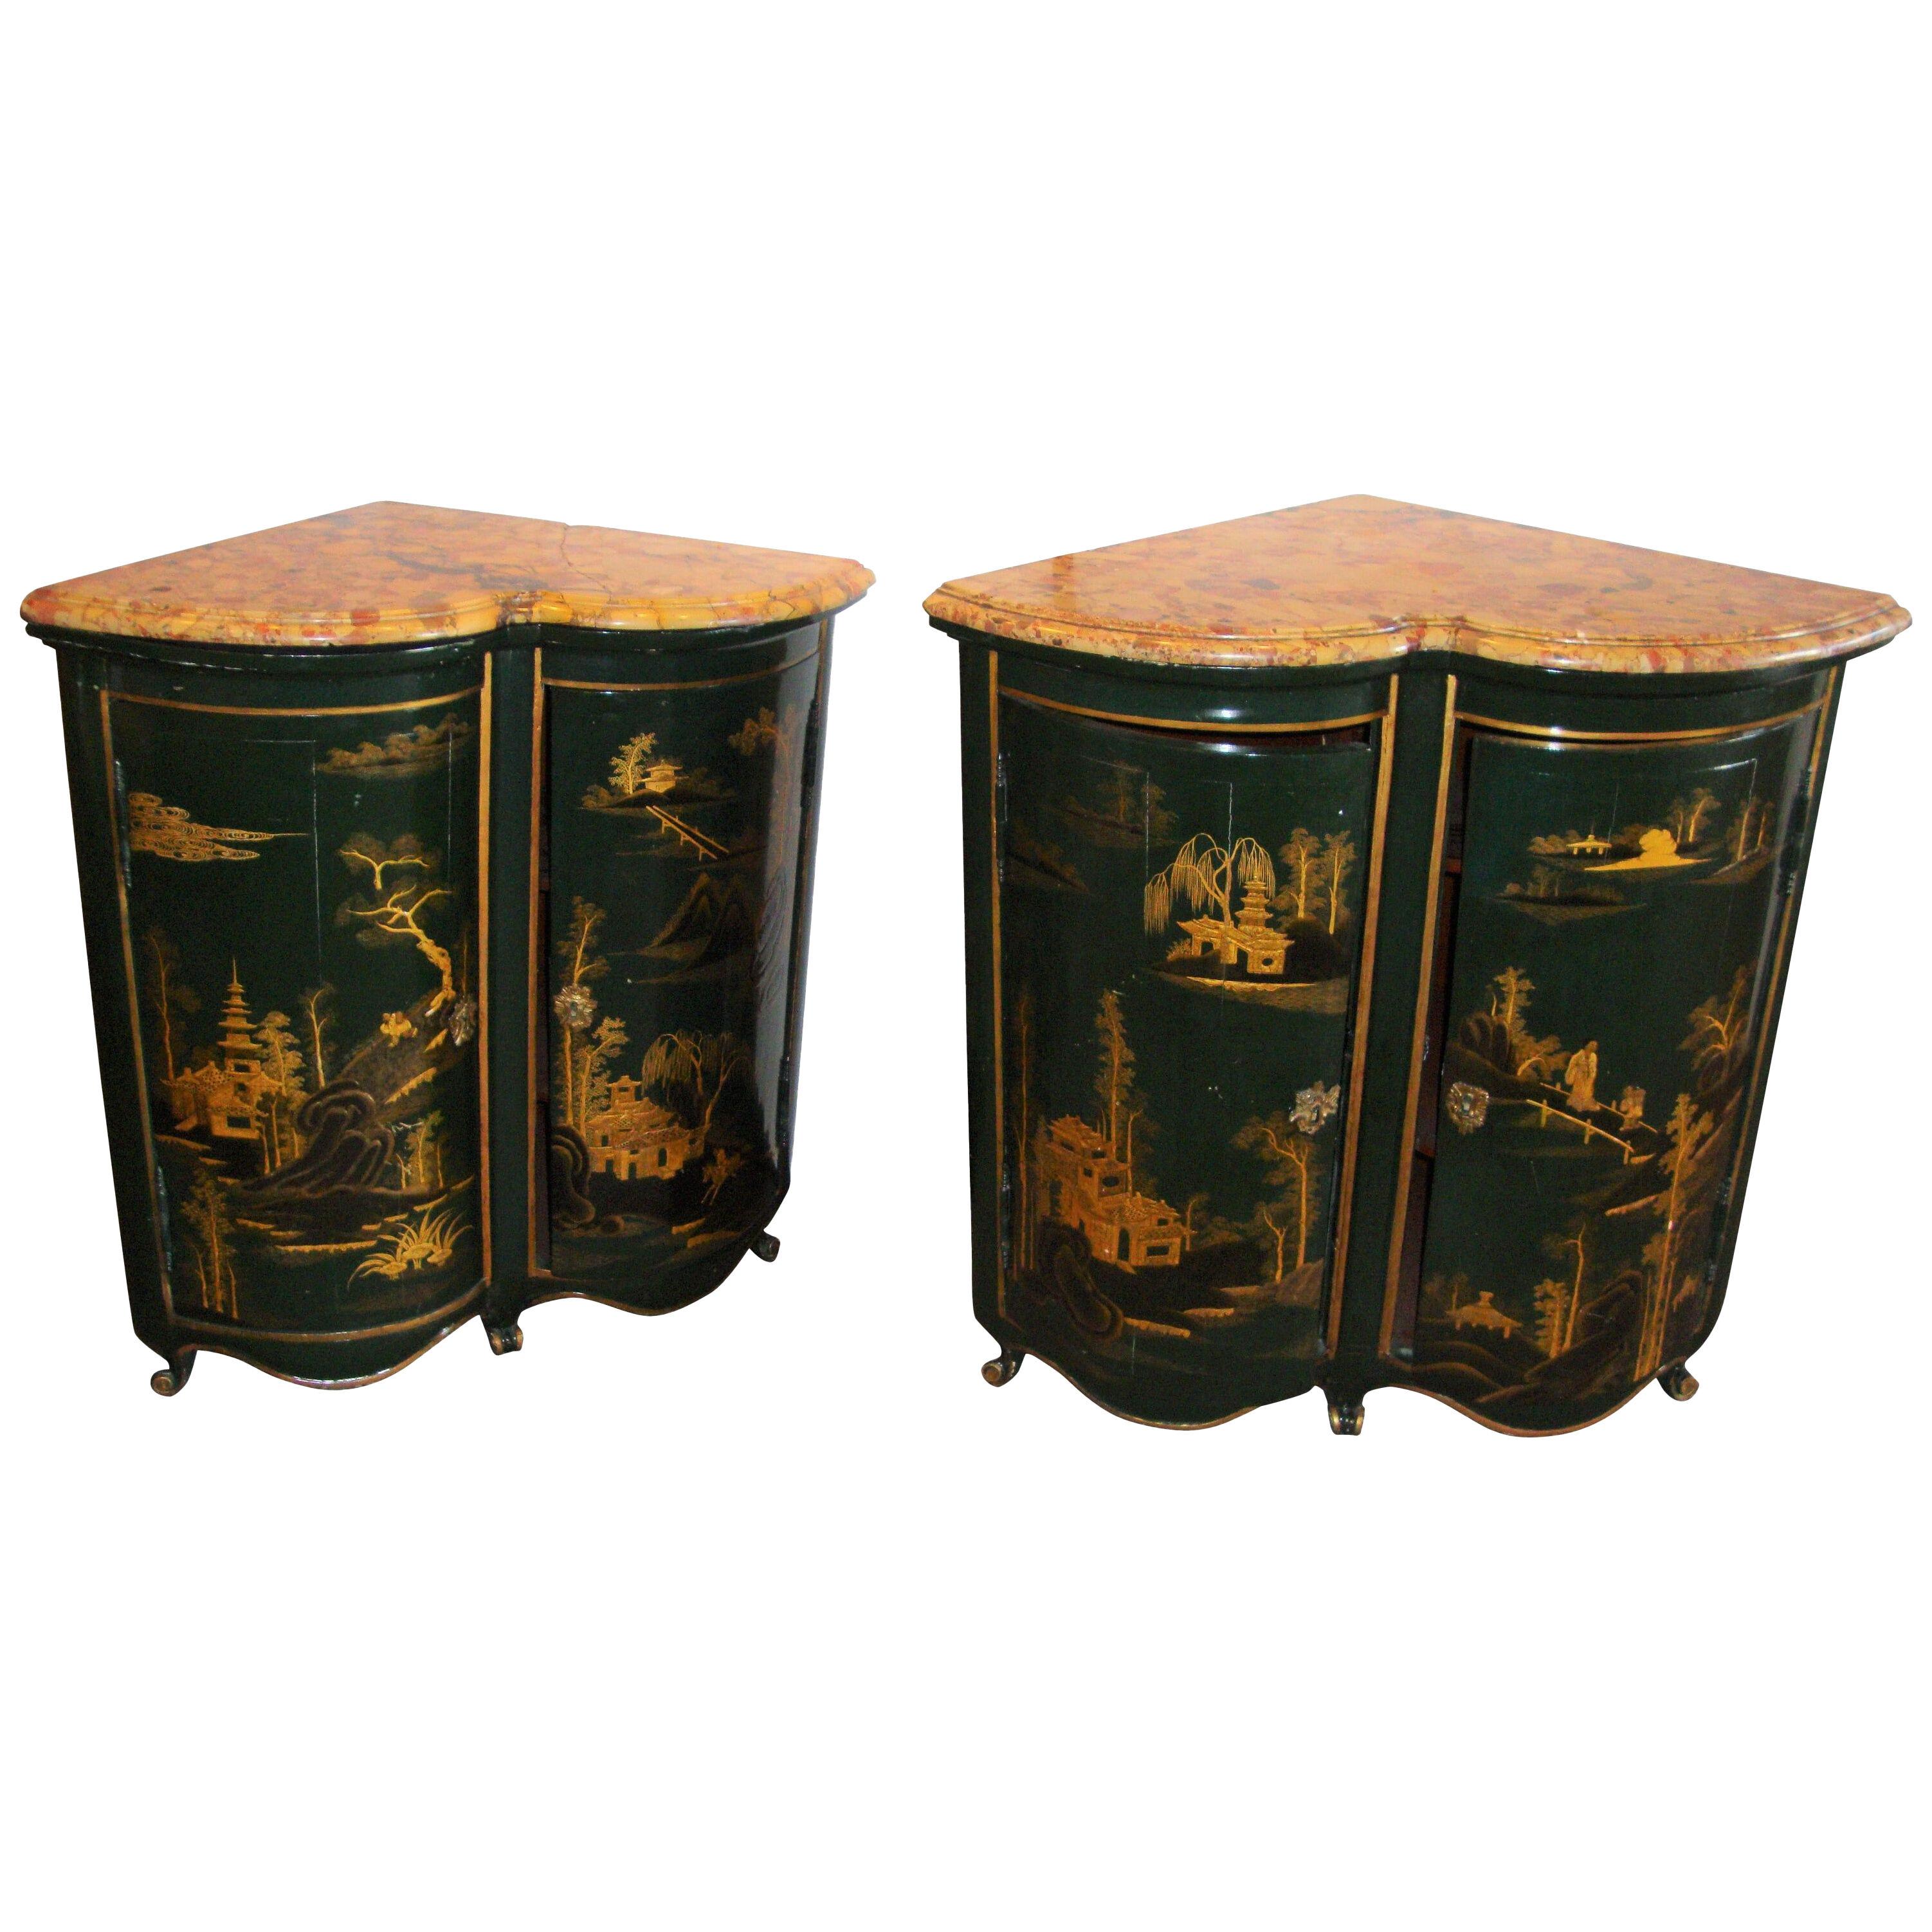 Pair of Maison Jansen Louis XV Style Green and Gilt Japanned Encoignures